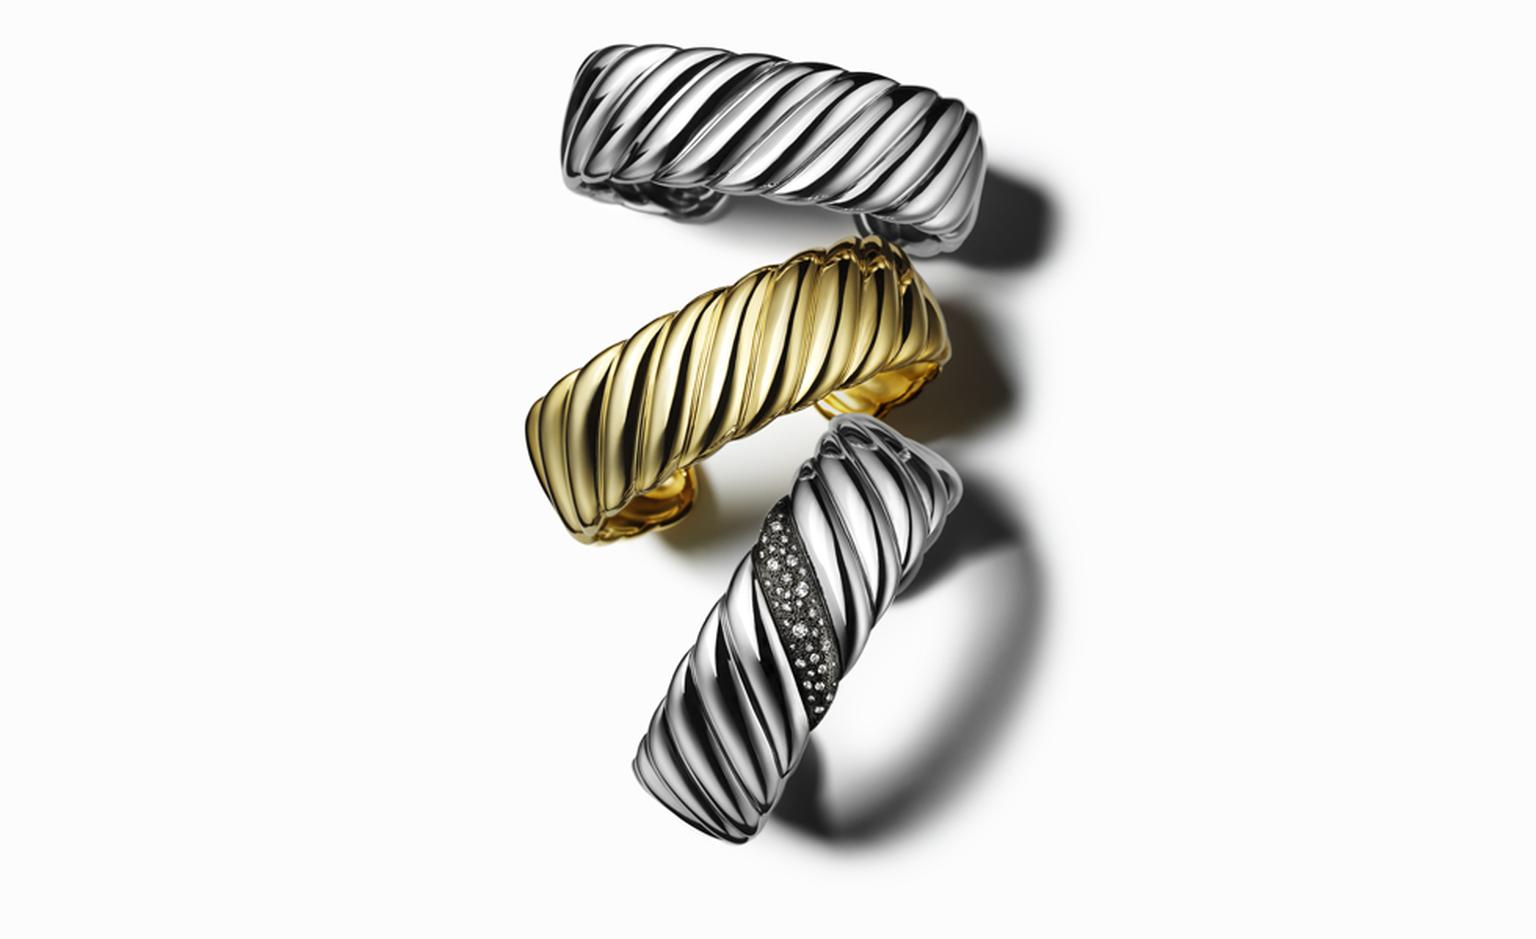 DAVID YURMAN, Narrow sculpted cuffs in silver and gold, from $550 - $7,950